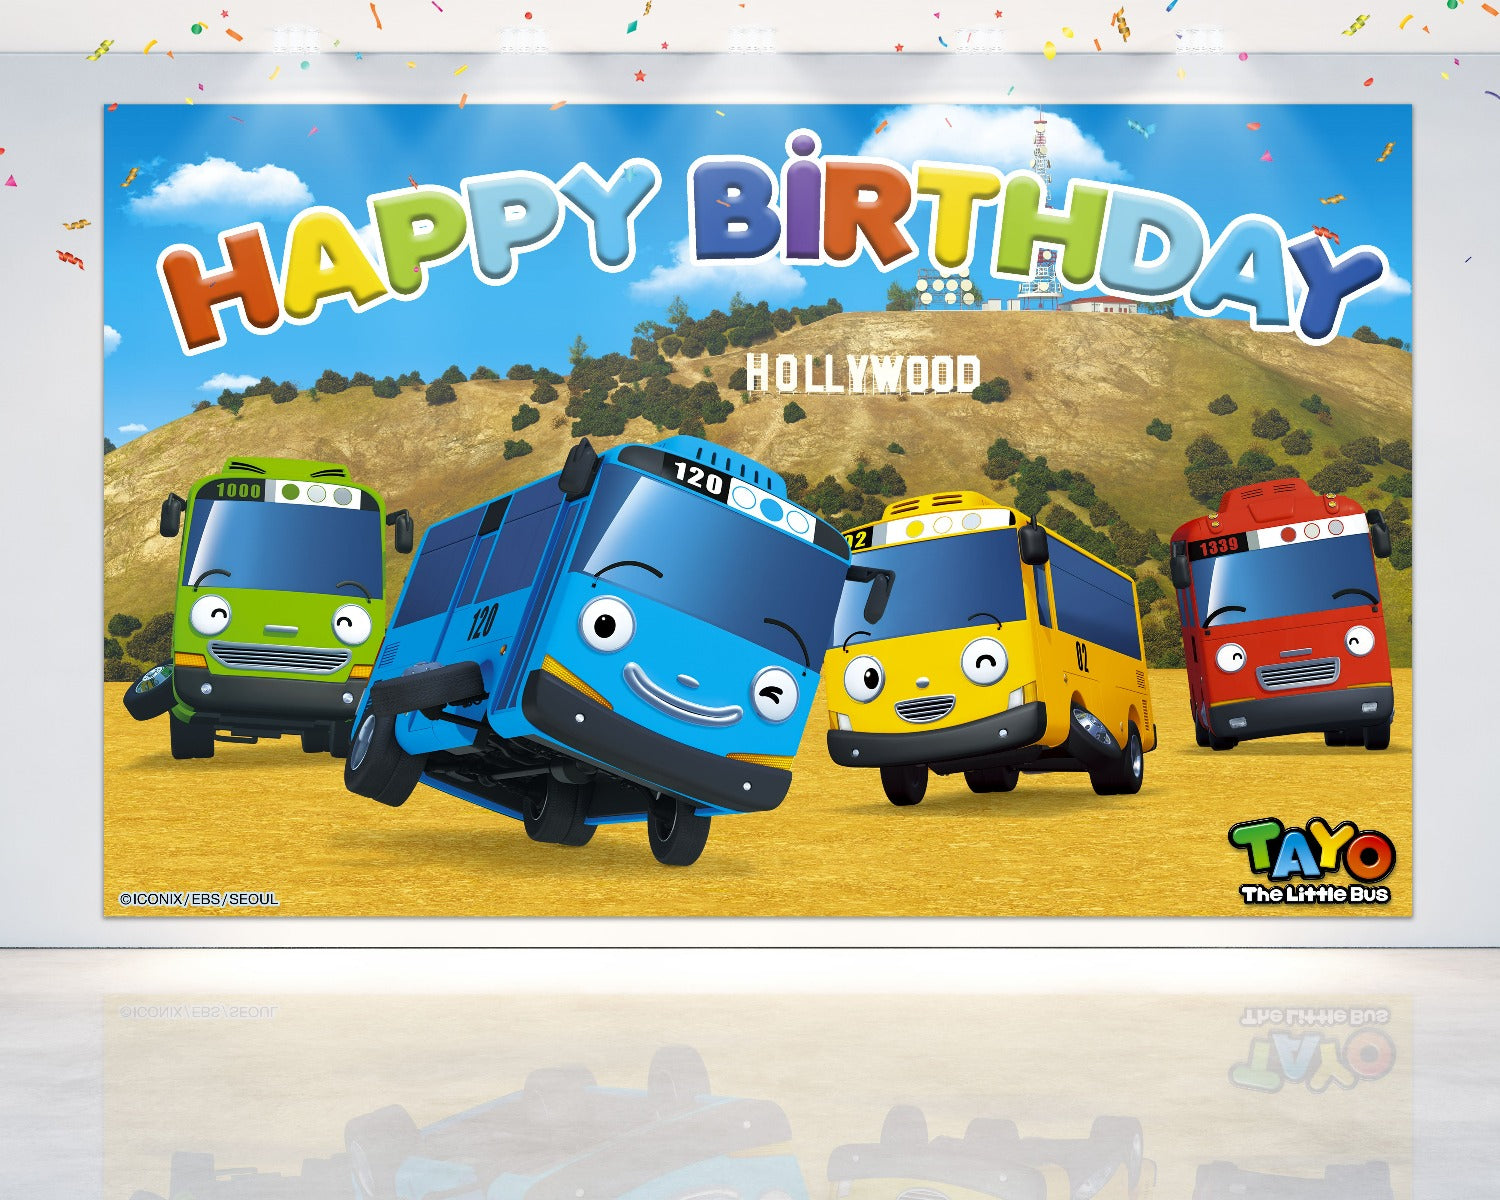 "Happy Birthday Hollywood" - Tayo the Little Bus 5x3 FT Party Backdrop